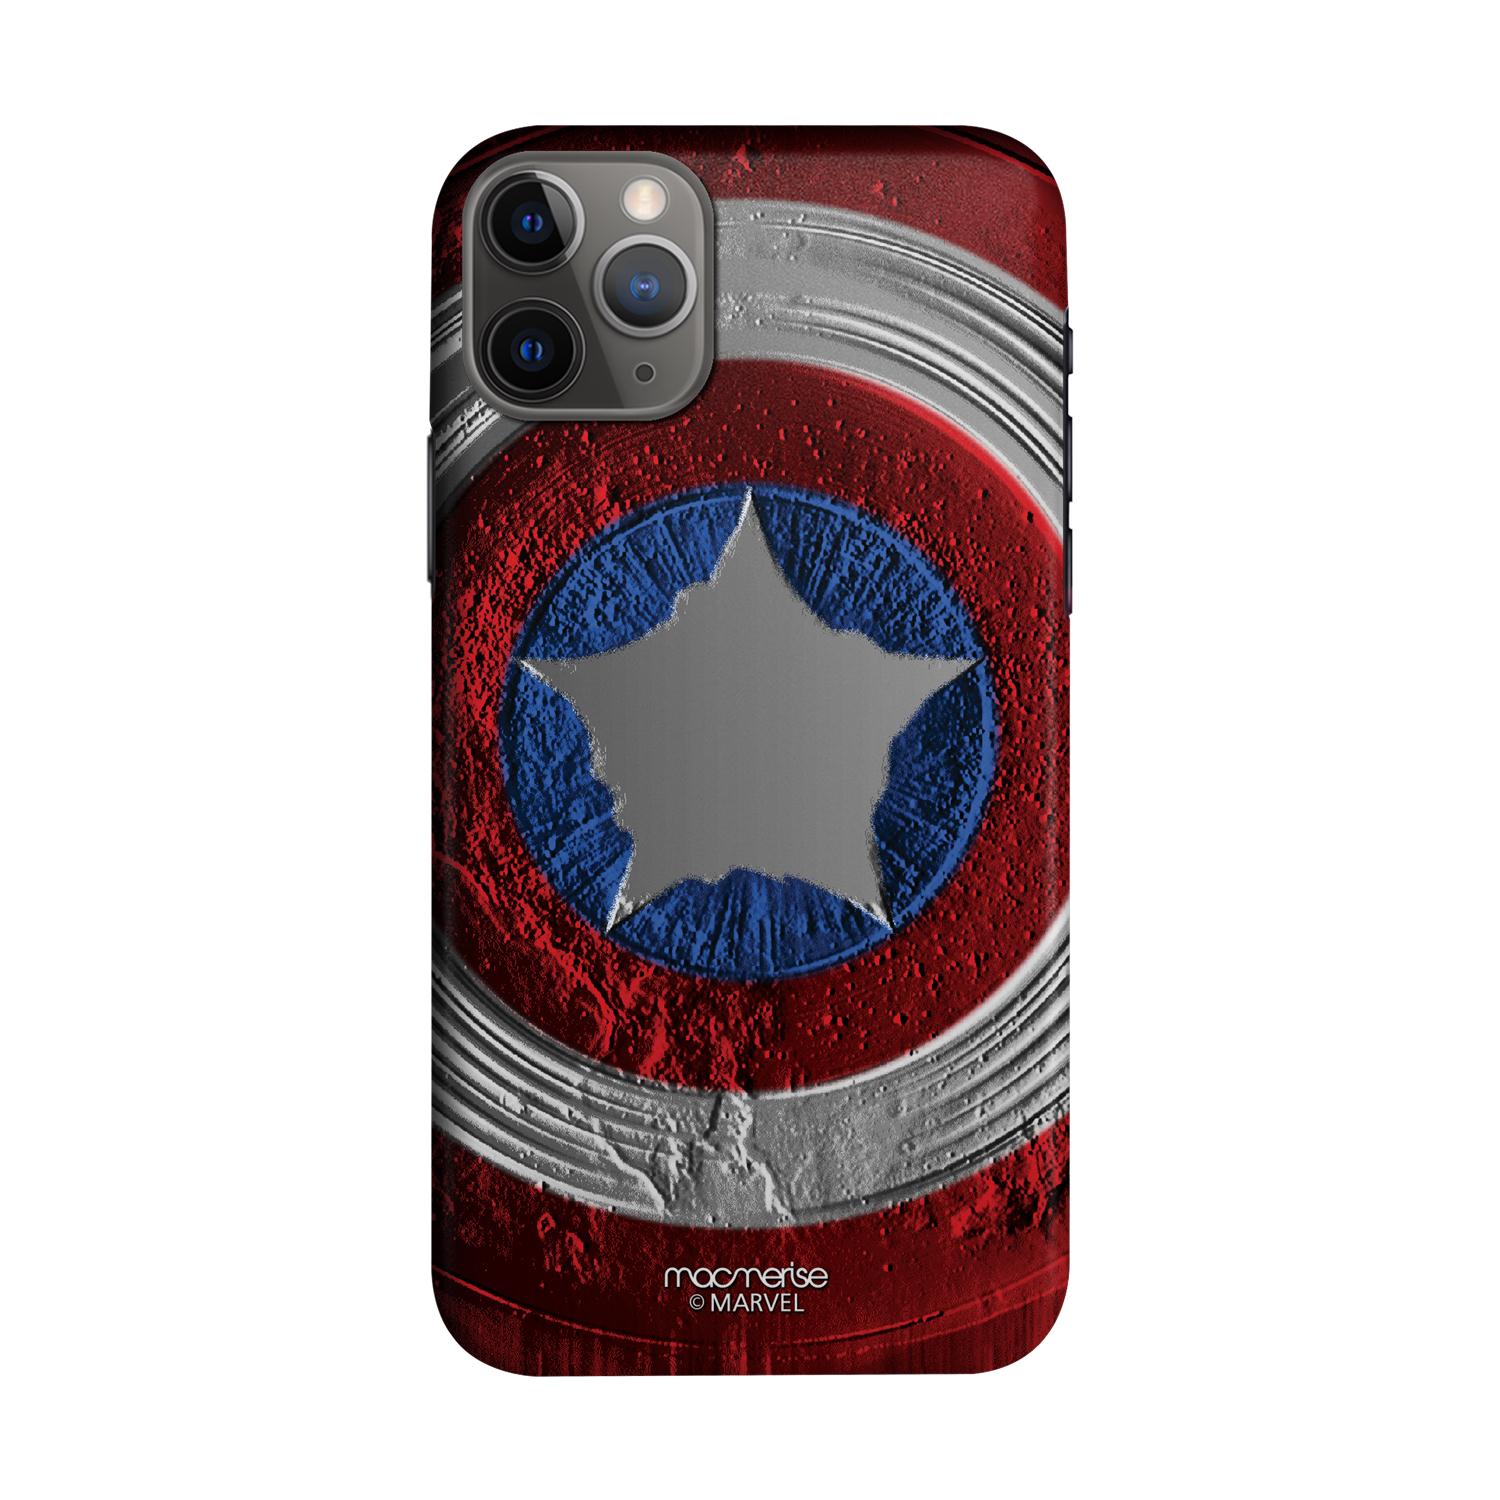 Buy Stoned Shield - Sleek Phone Case for iPhone 11 Pro Max Online